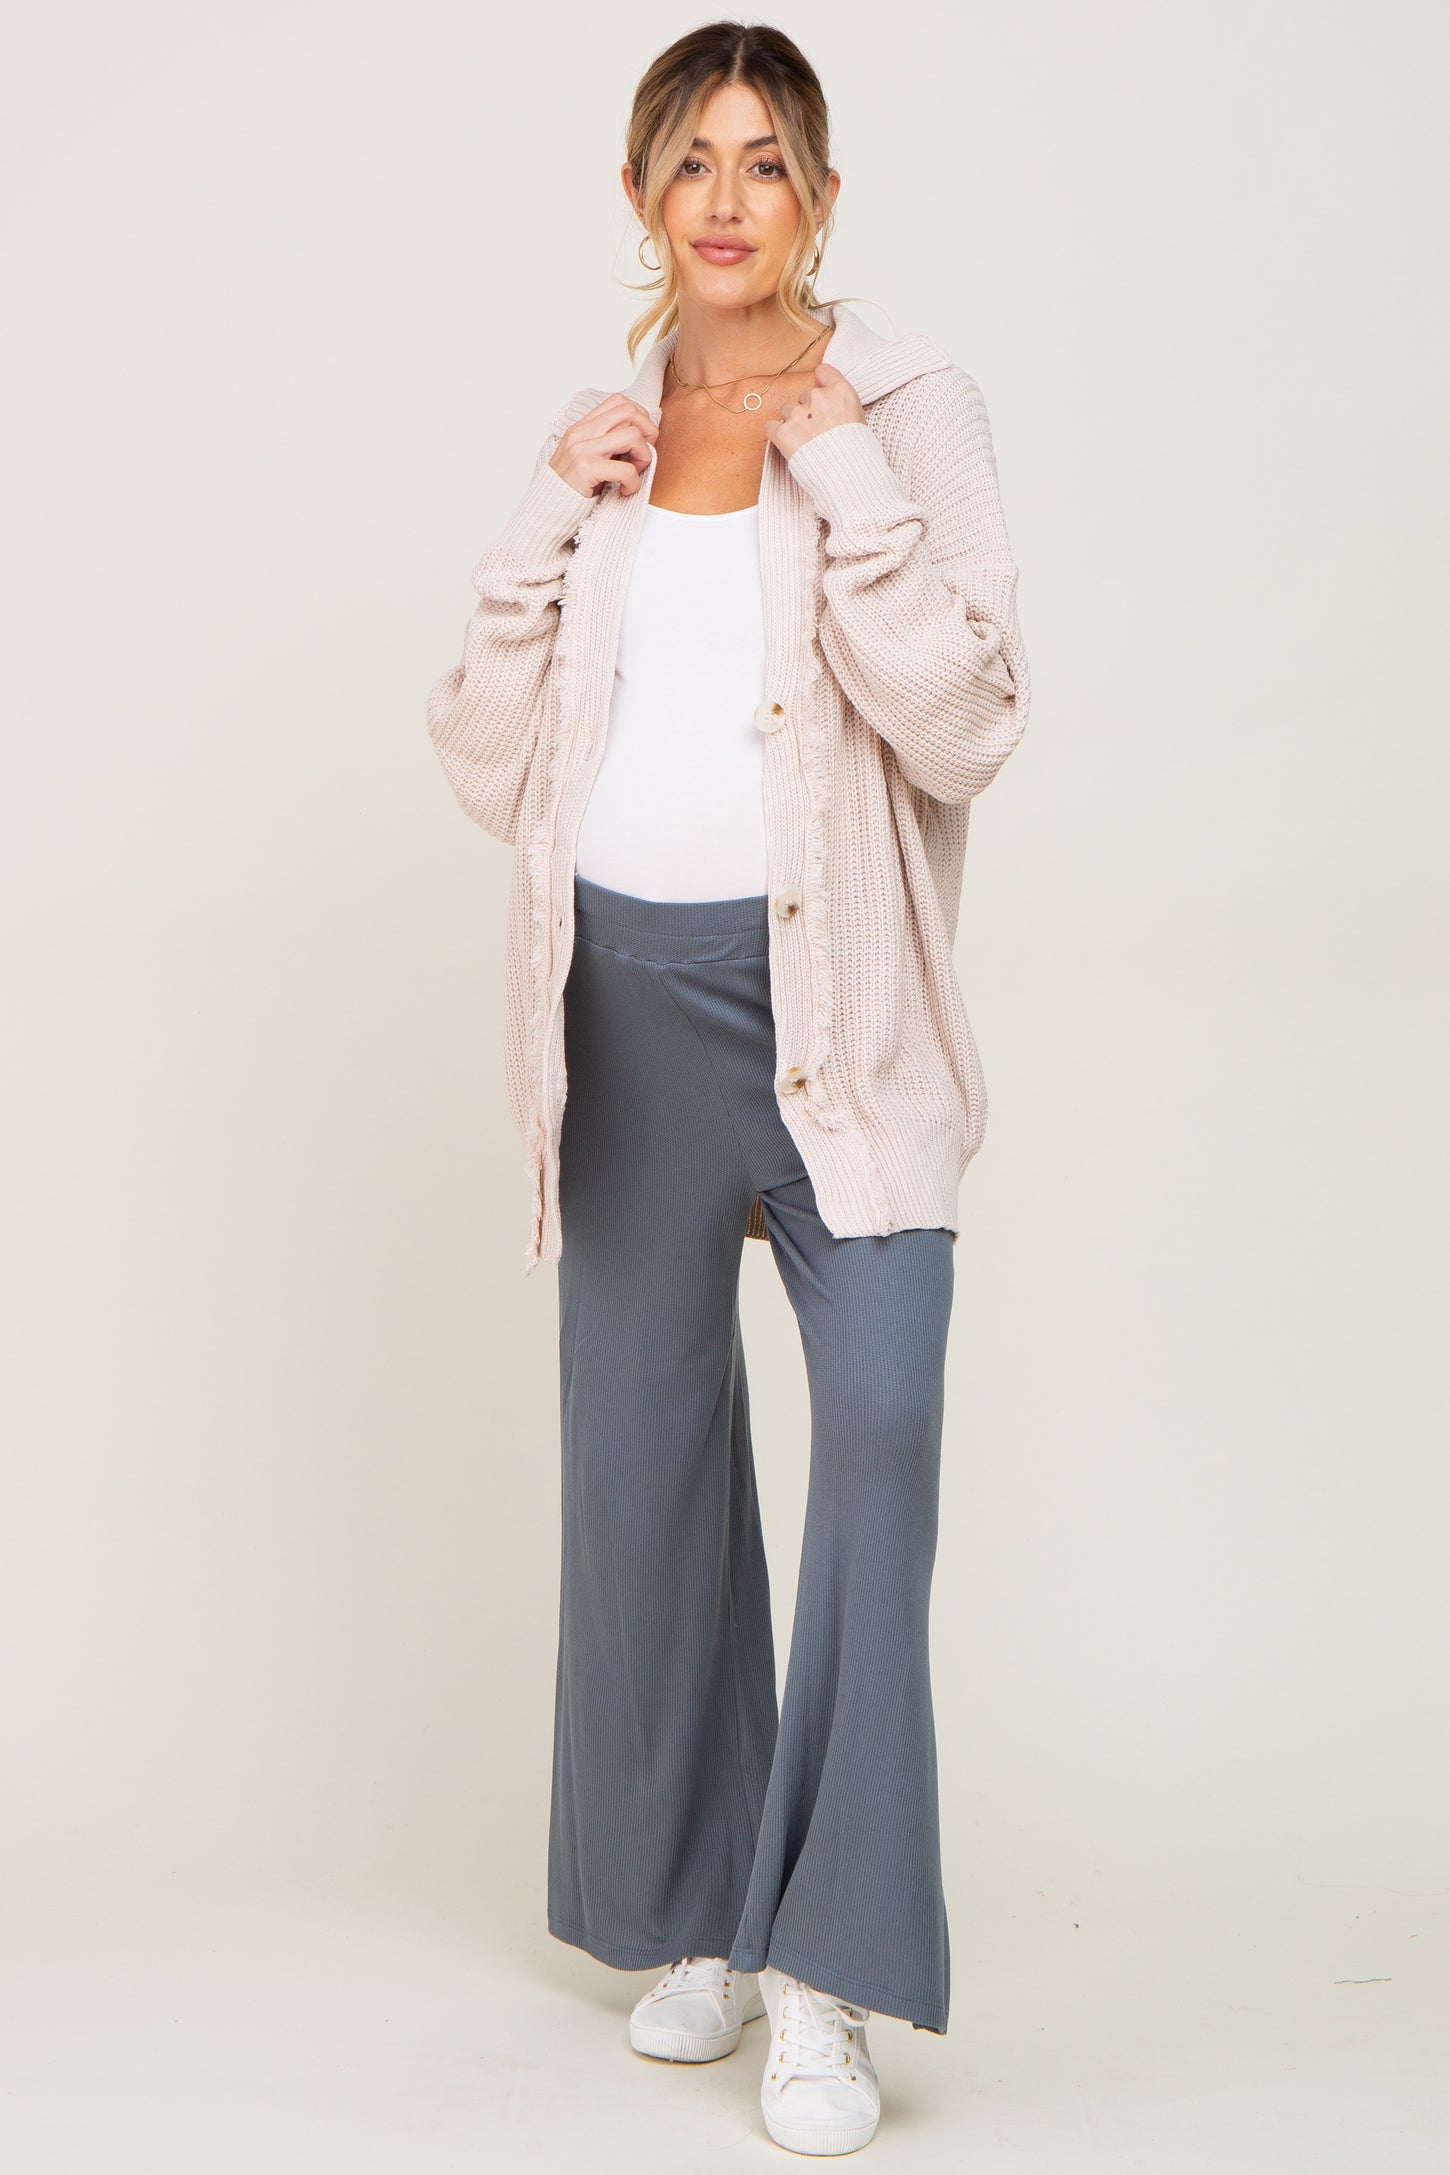 Beige Knit Frayed Button Down Maternity Cardigan